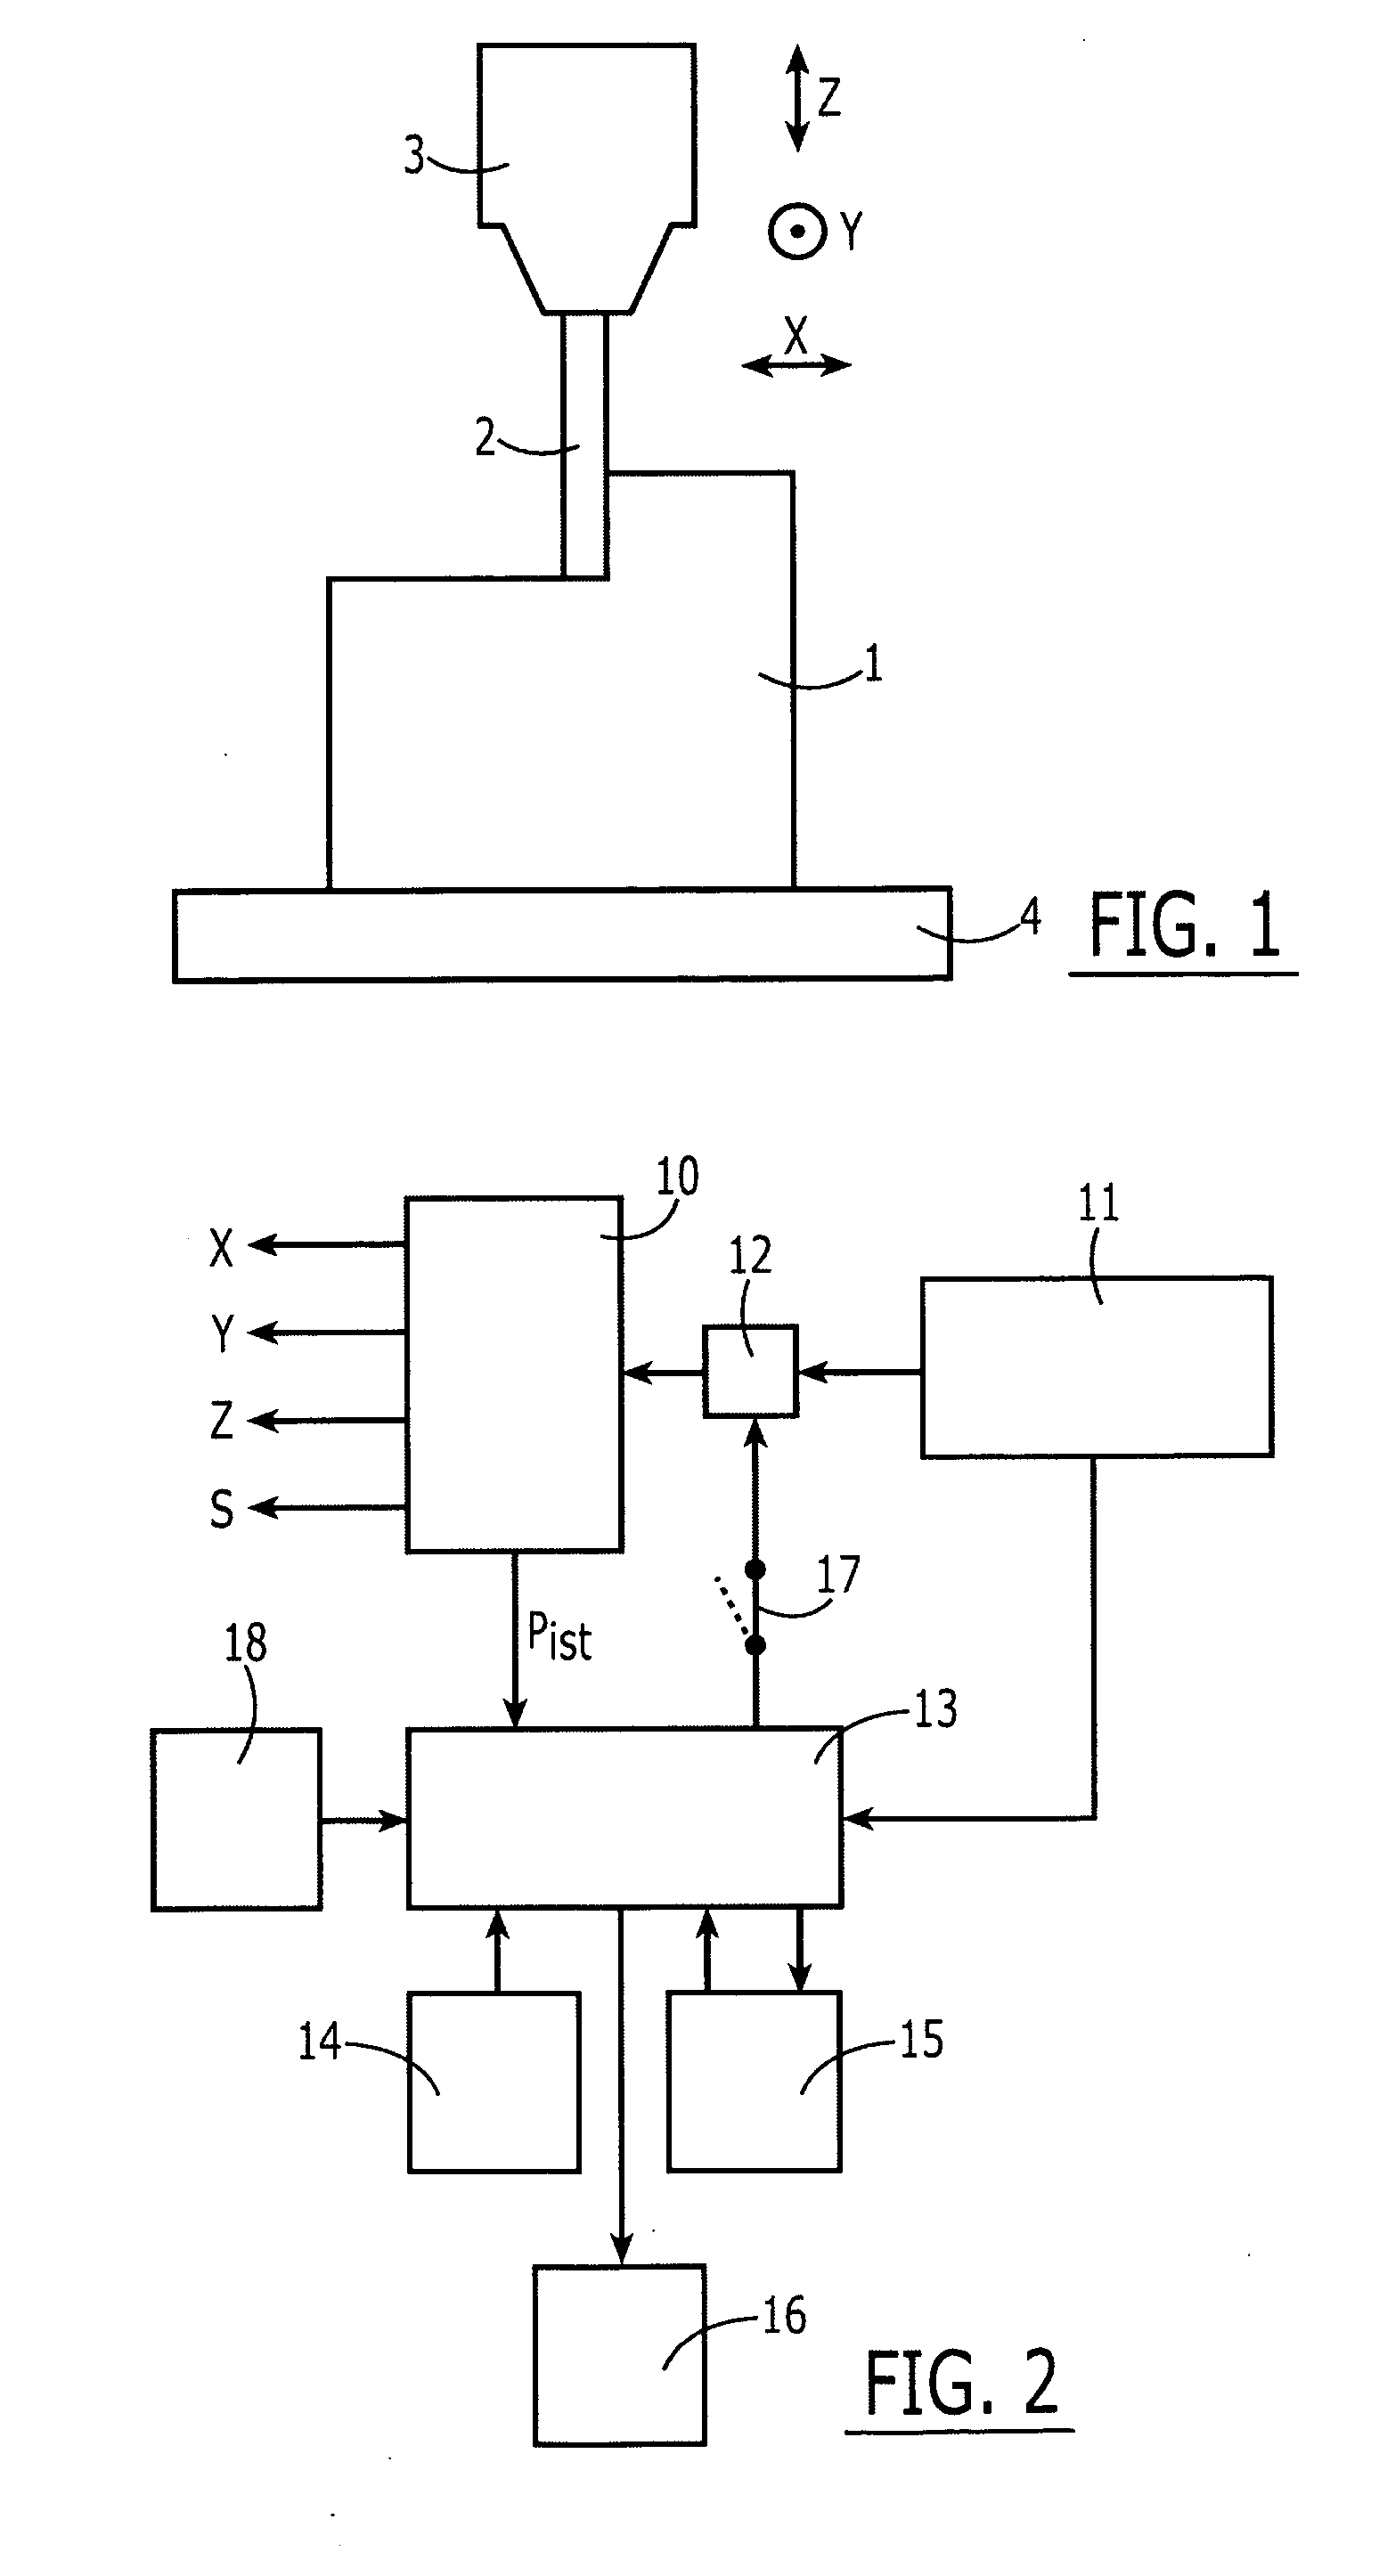 Method for adaptive feed rate regulation on numerically controlled machine tools